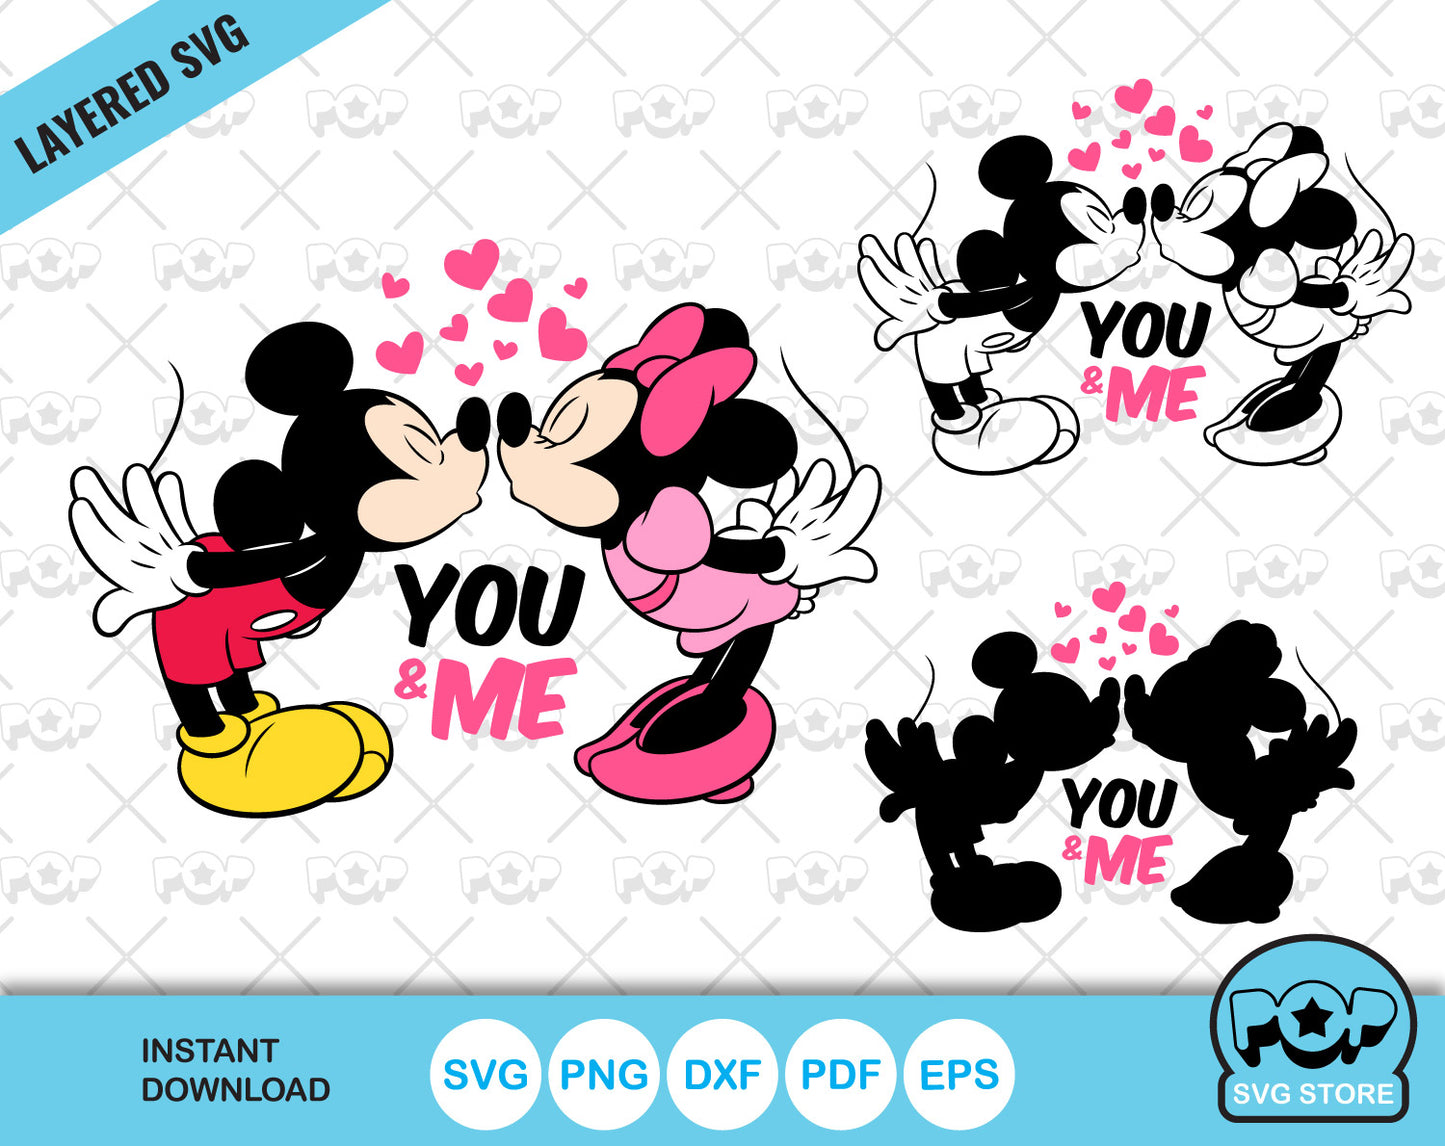 Mickey and Minnie Valentine's Day clipart, SVG cut files for Cricut / Silhouette, instant download